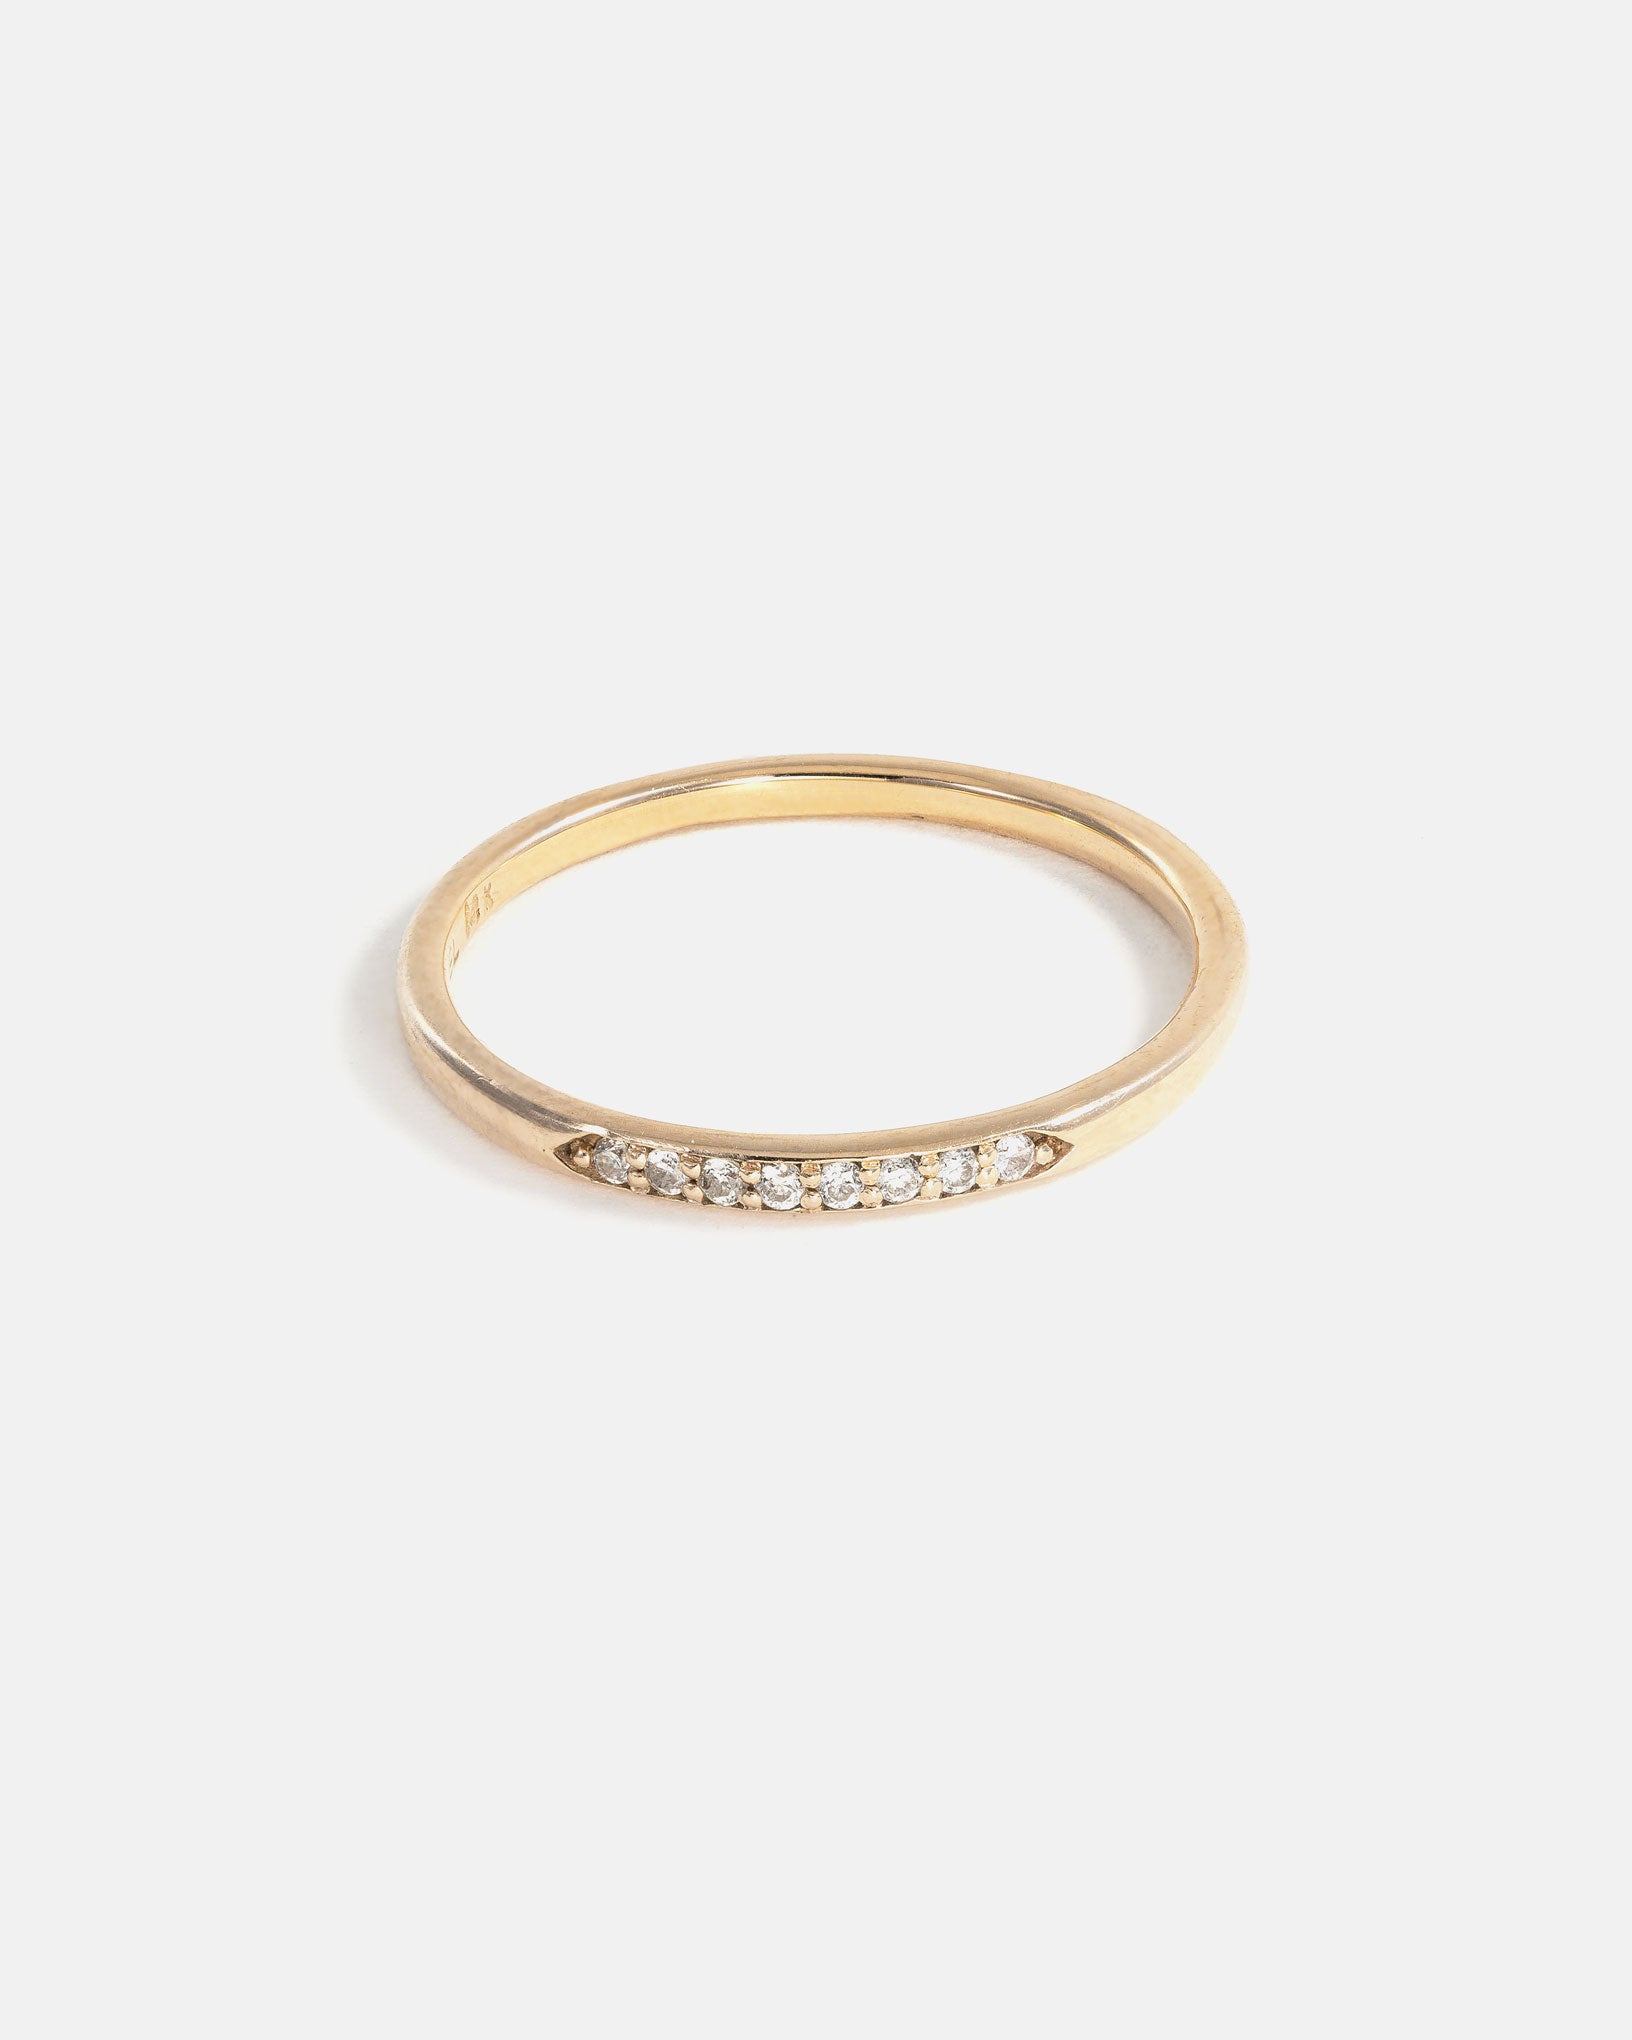 Stratura Wedding Ring in 14k Gold with lab grown diamonds